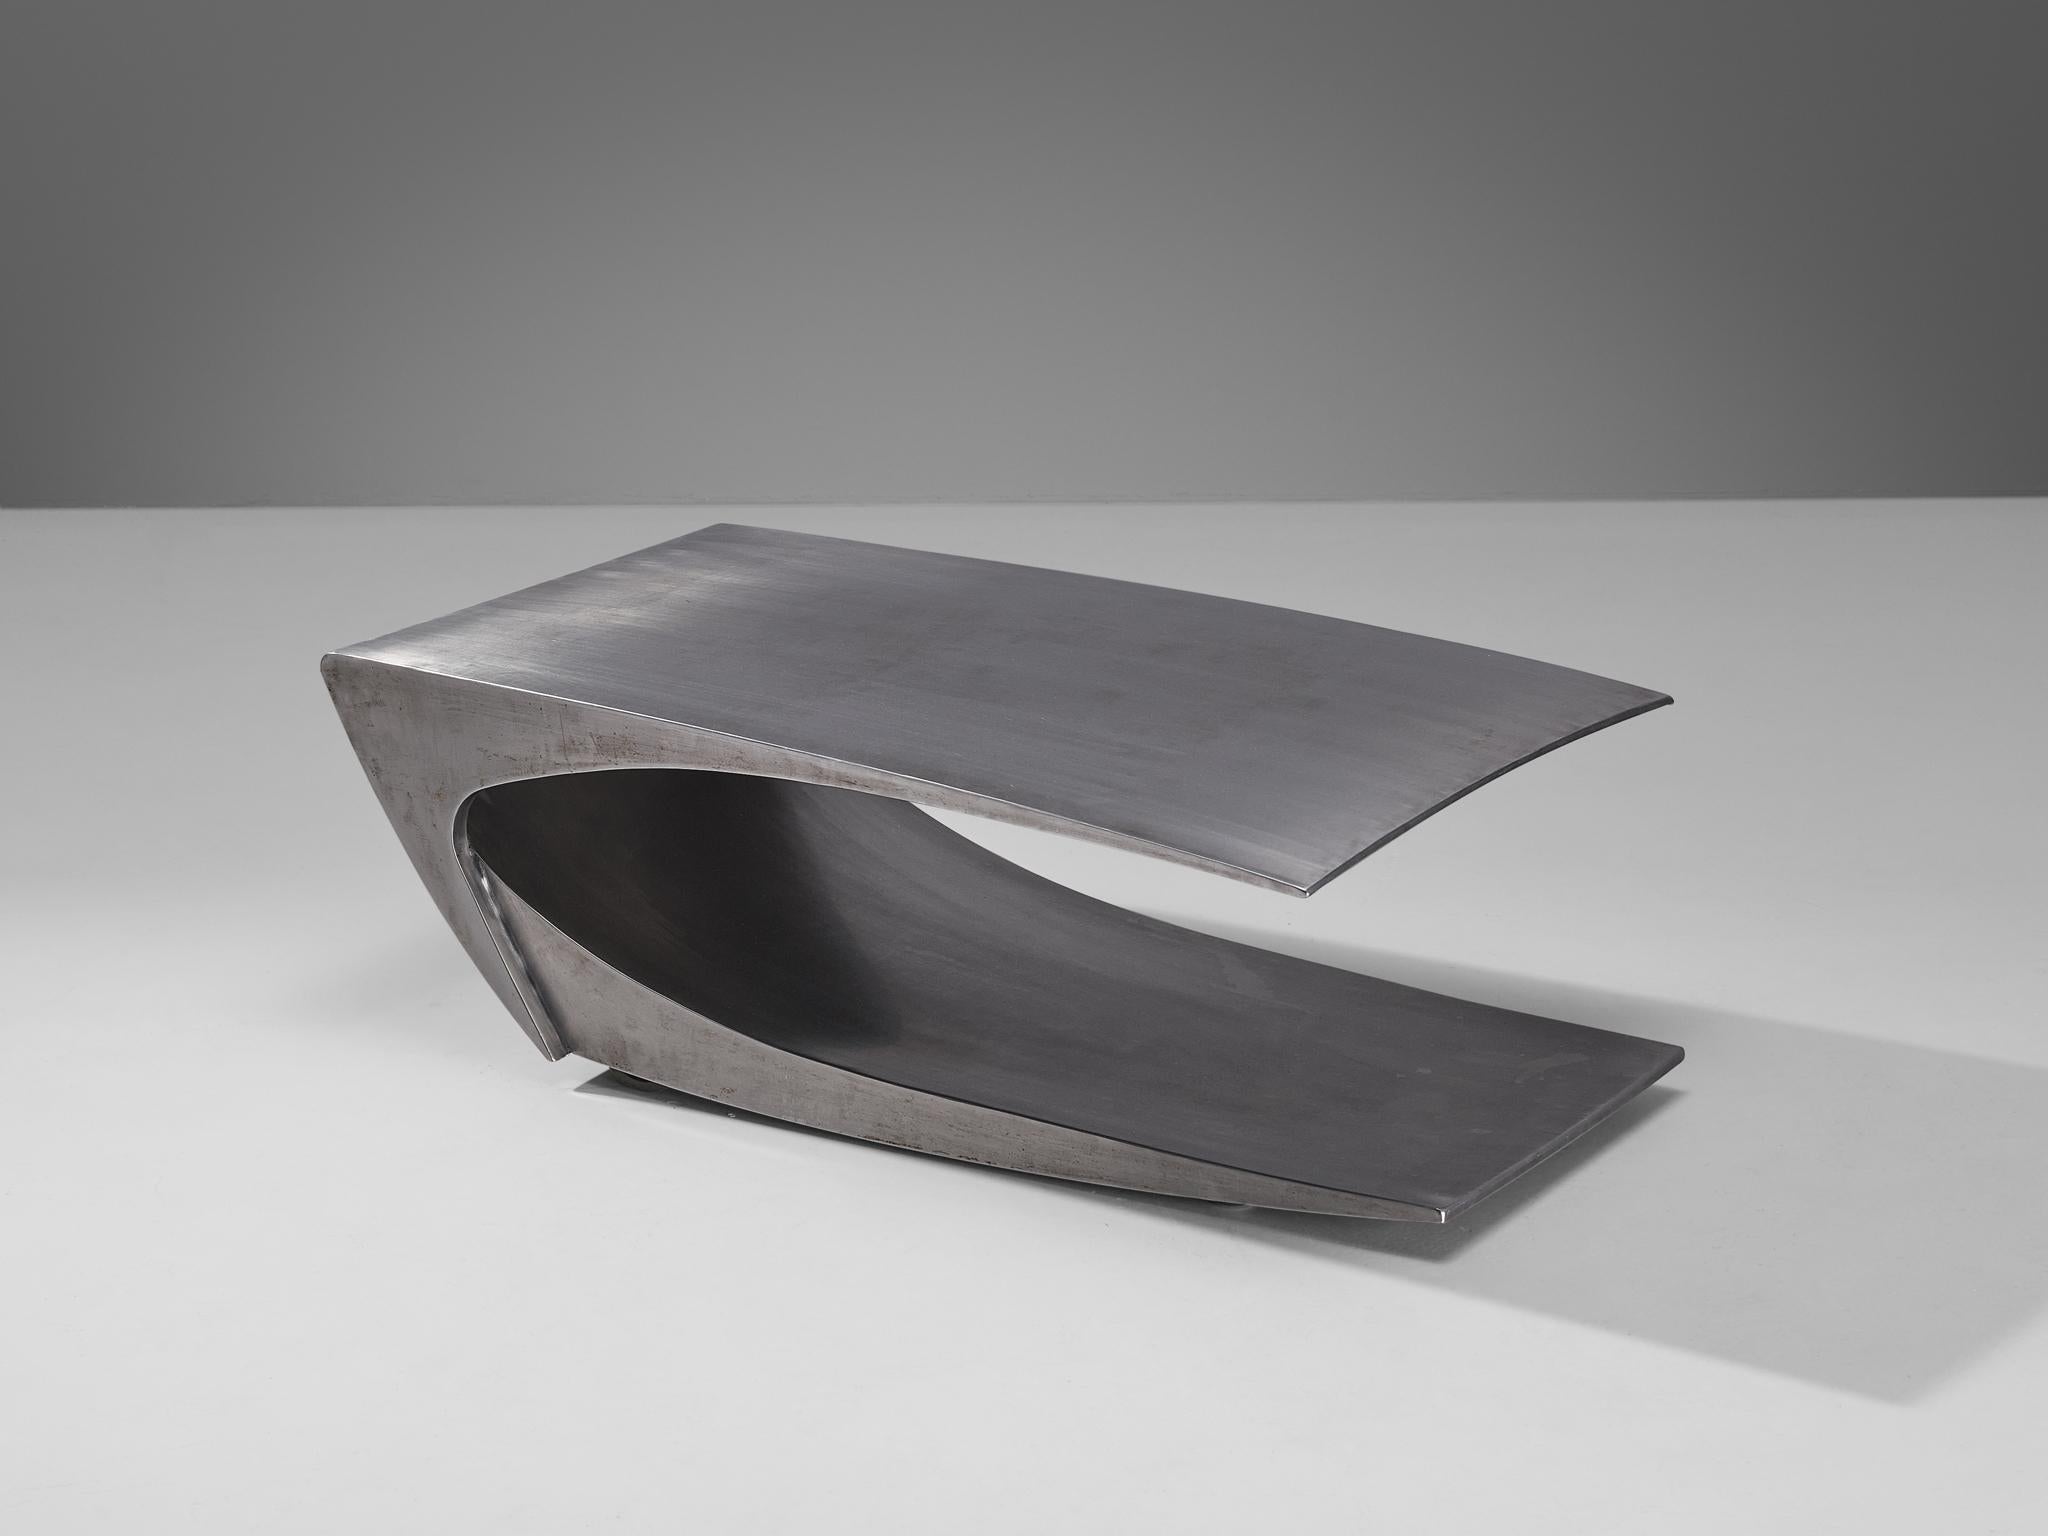 Coffee table, stainless steel, France, 1970s.

A sleek coffee table with a distinctive look, inspired by the 70s French stainless steel furniture style. Noted designers such as Michel Boyer, François Monnet, Roger Tallon, Maria Pergay, and Maison